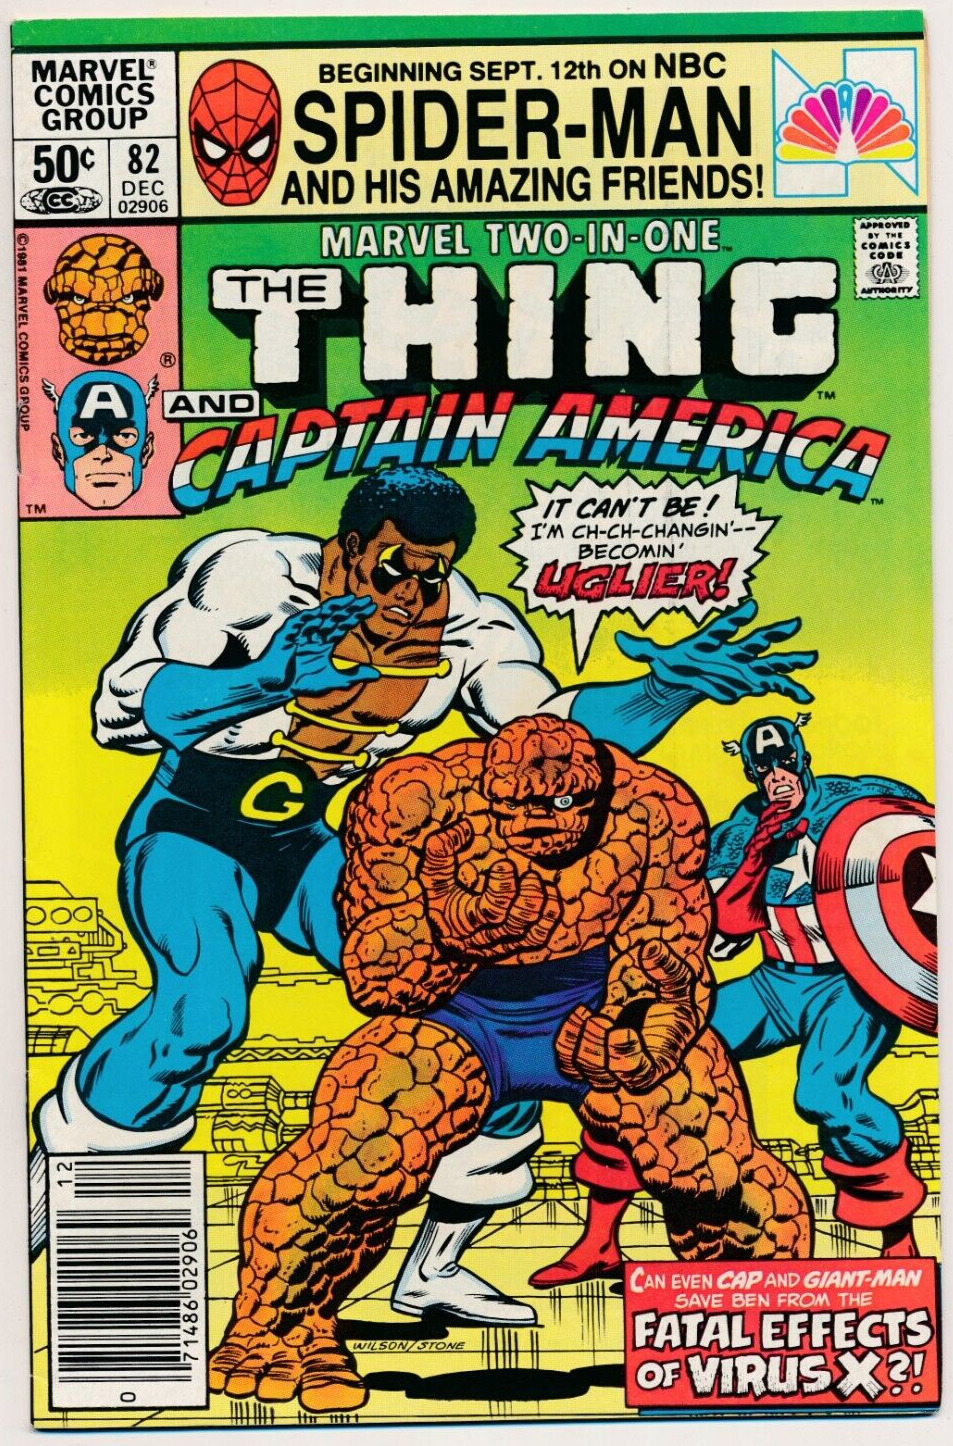 Marvel Two-In-One (Marvel, 1974 series) #82 VF Thing and Captain America